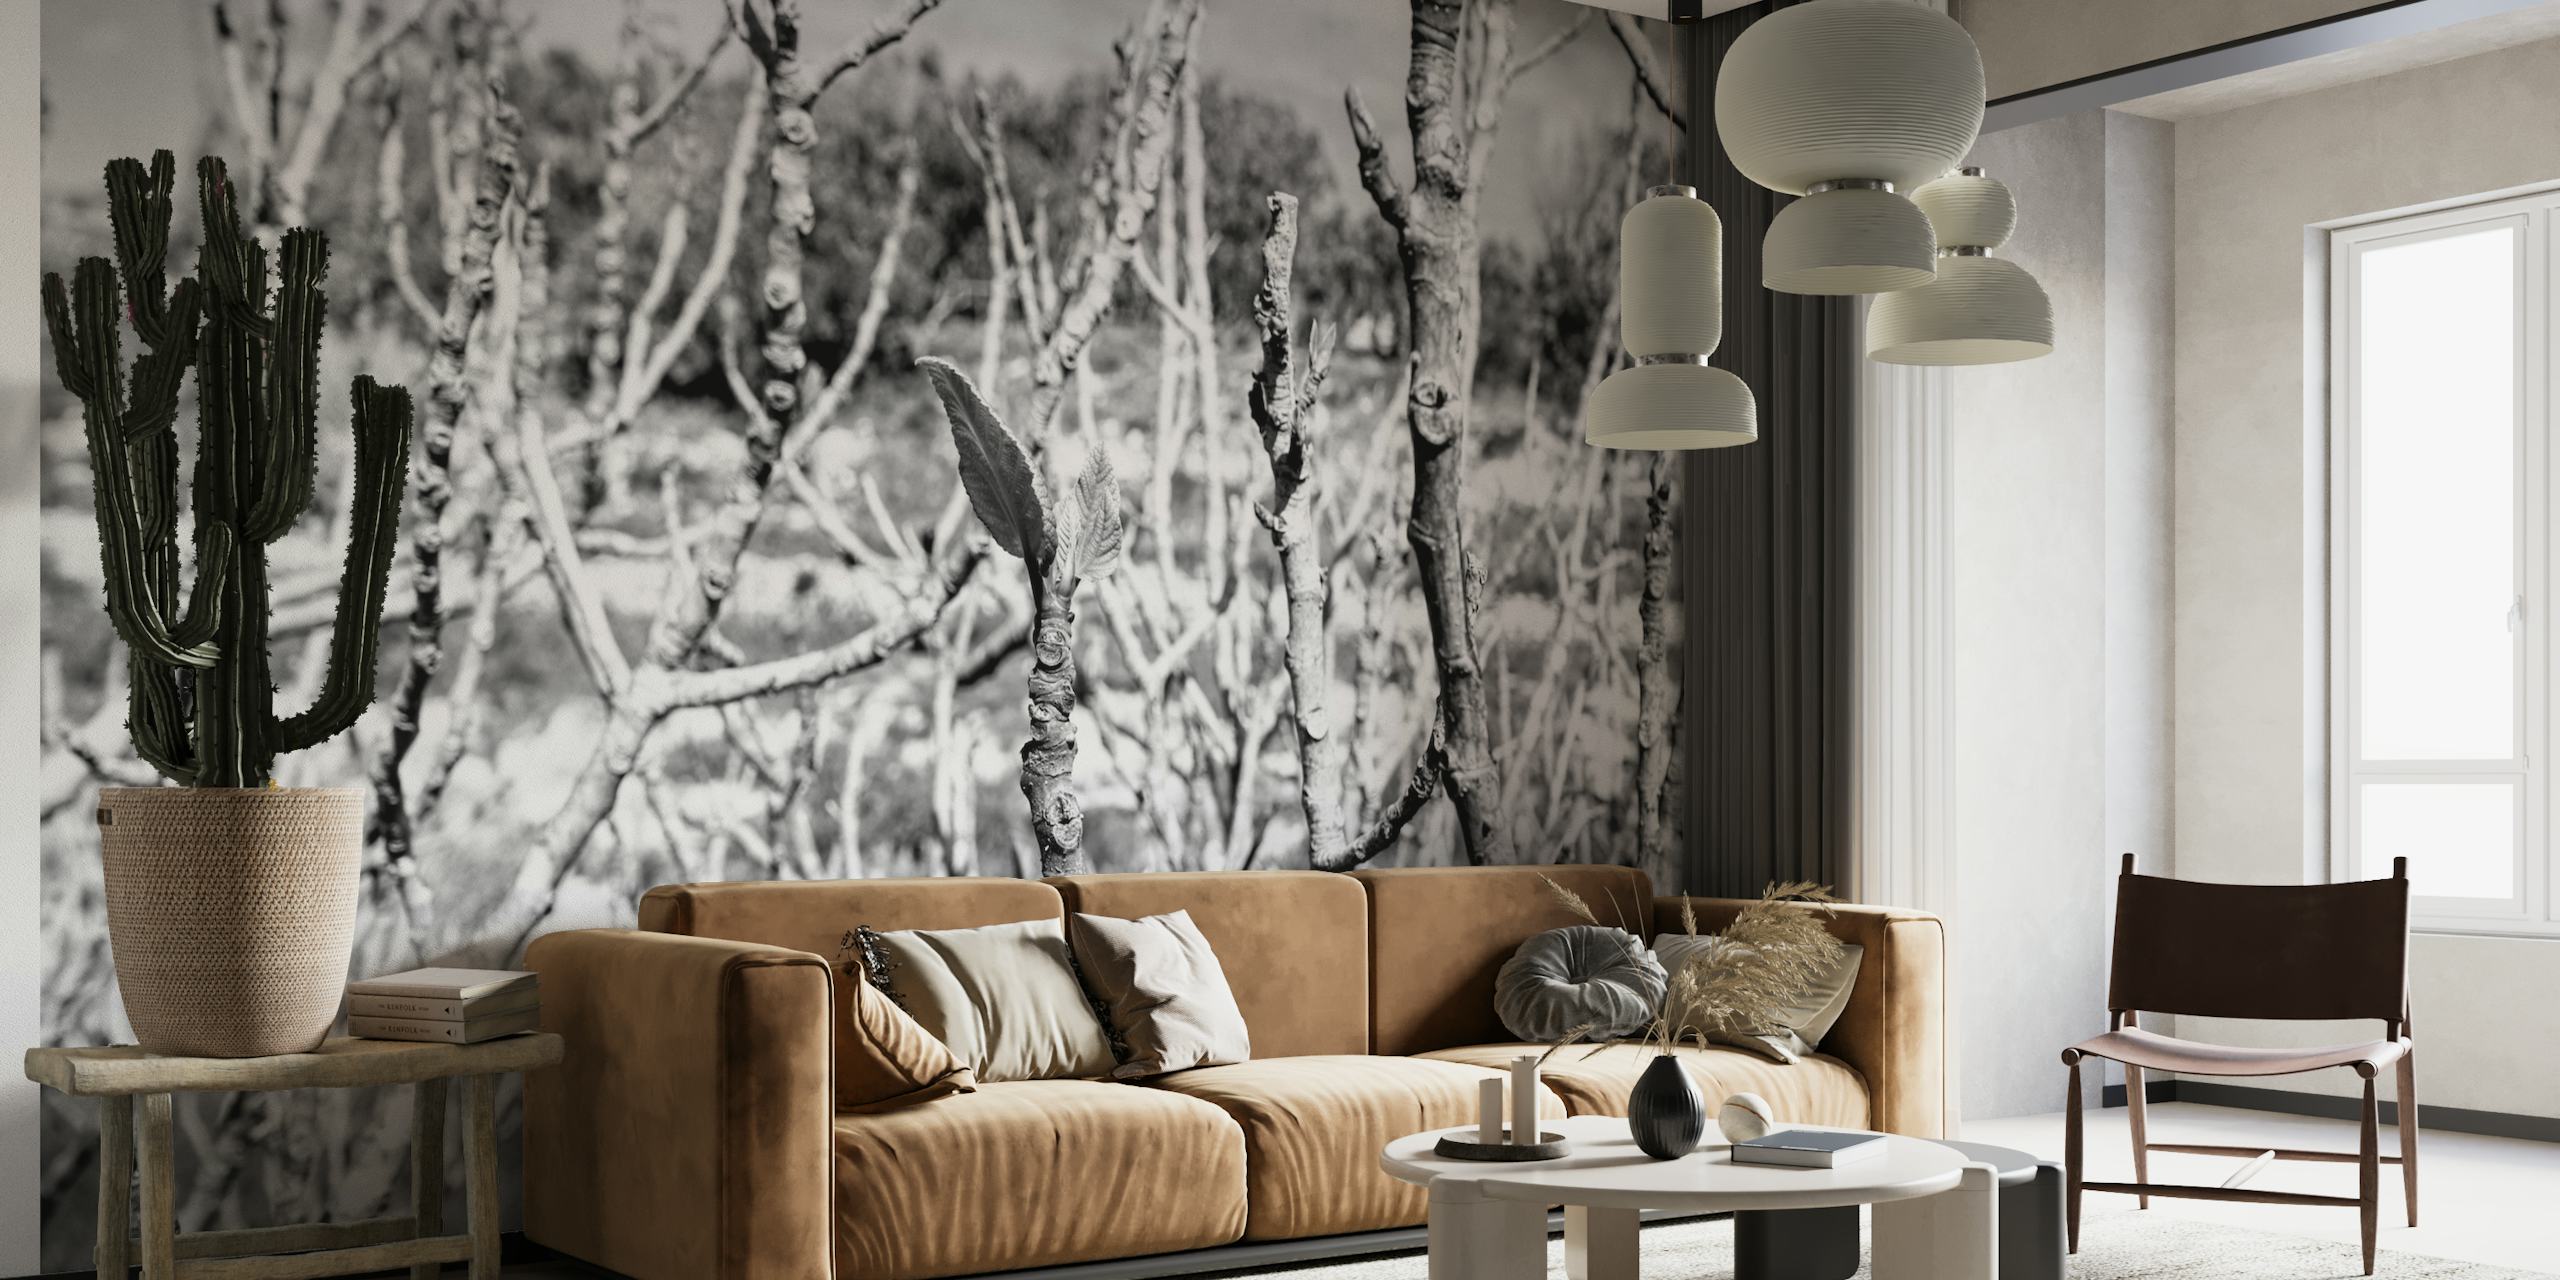 Black and white wall mural of intricate tree branches for interior decor